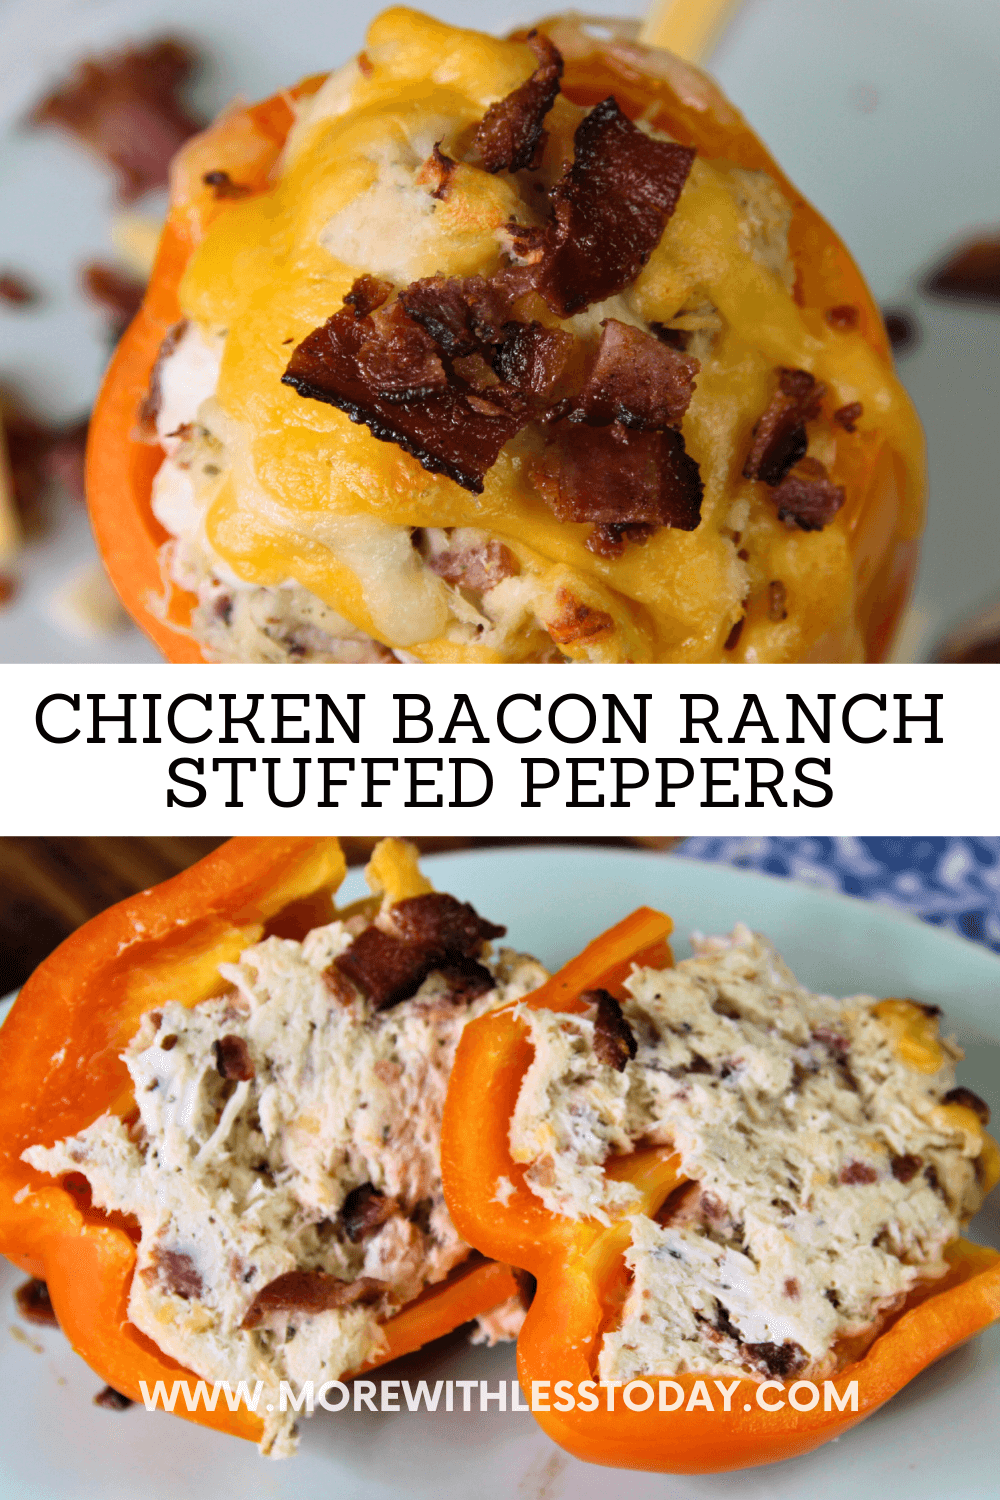 Chicken Bacon Ranch Stuffed Peppers - PIN